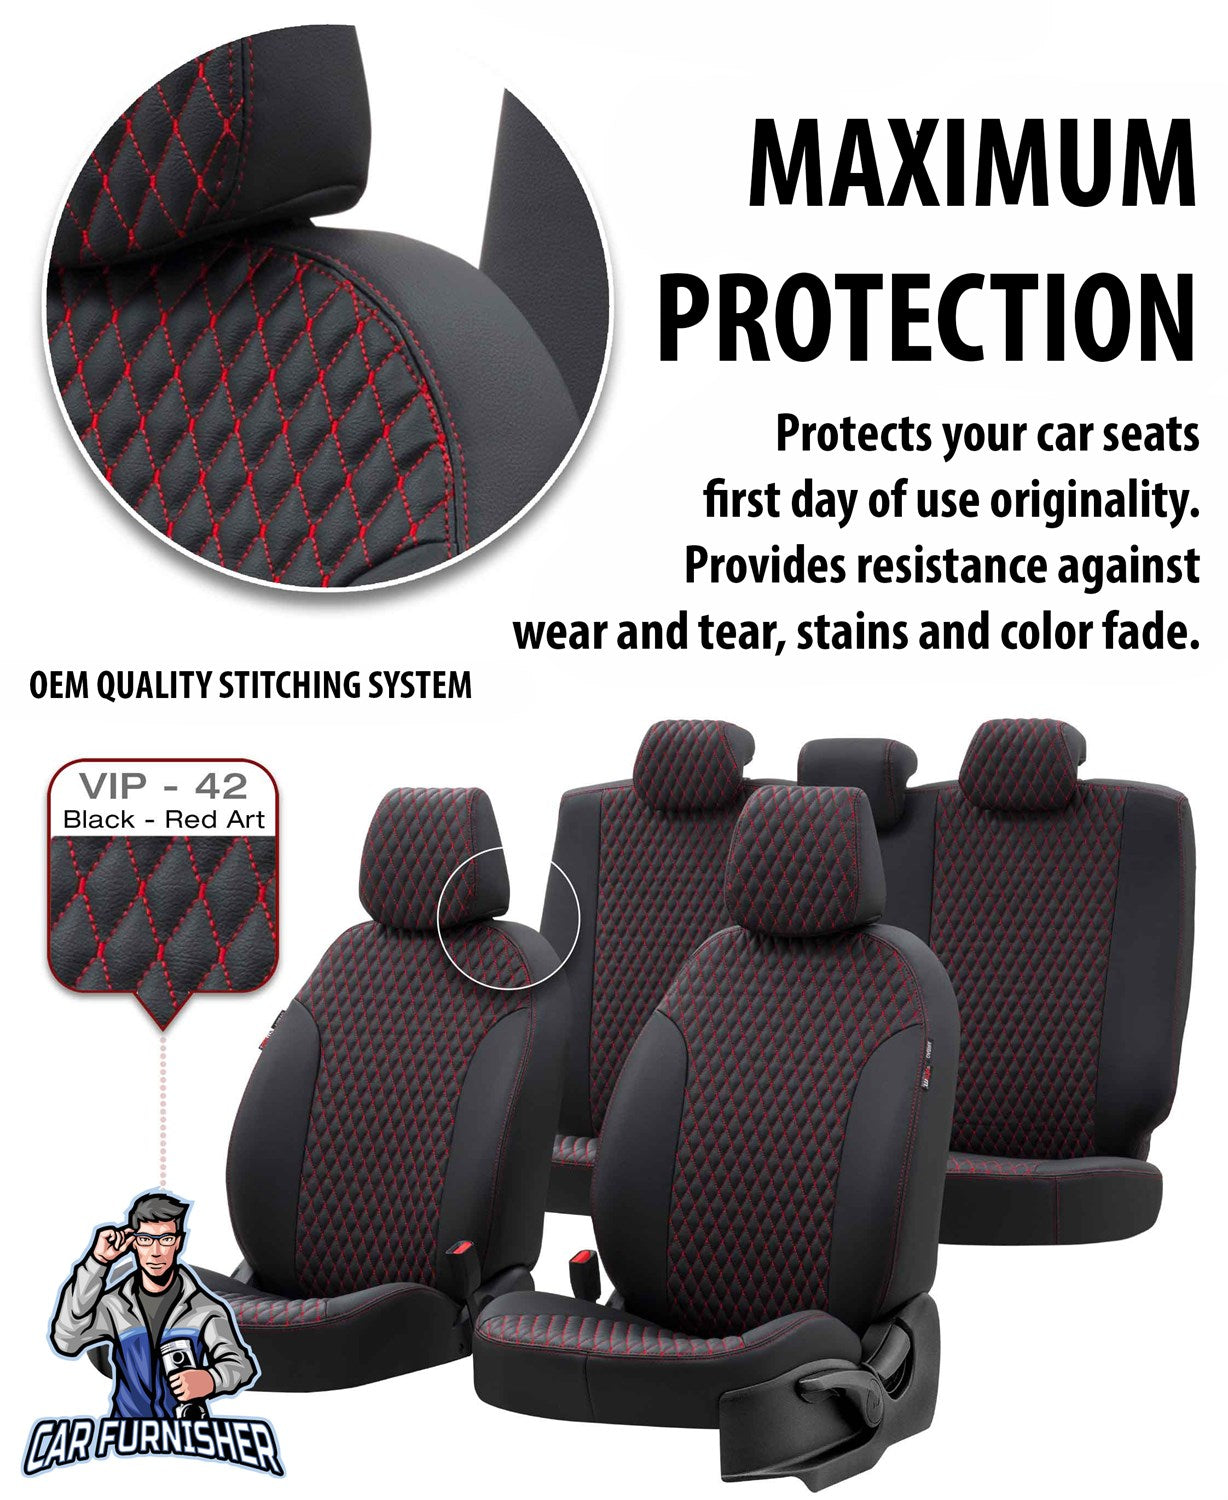 Nissan Qashqai Seat Covers Amsterdam Leather Design Dark Gray Leather